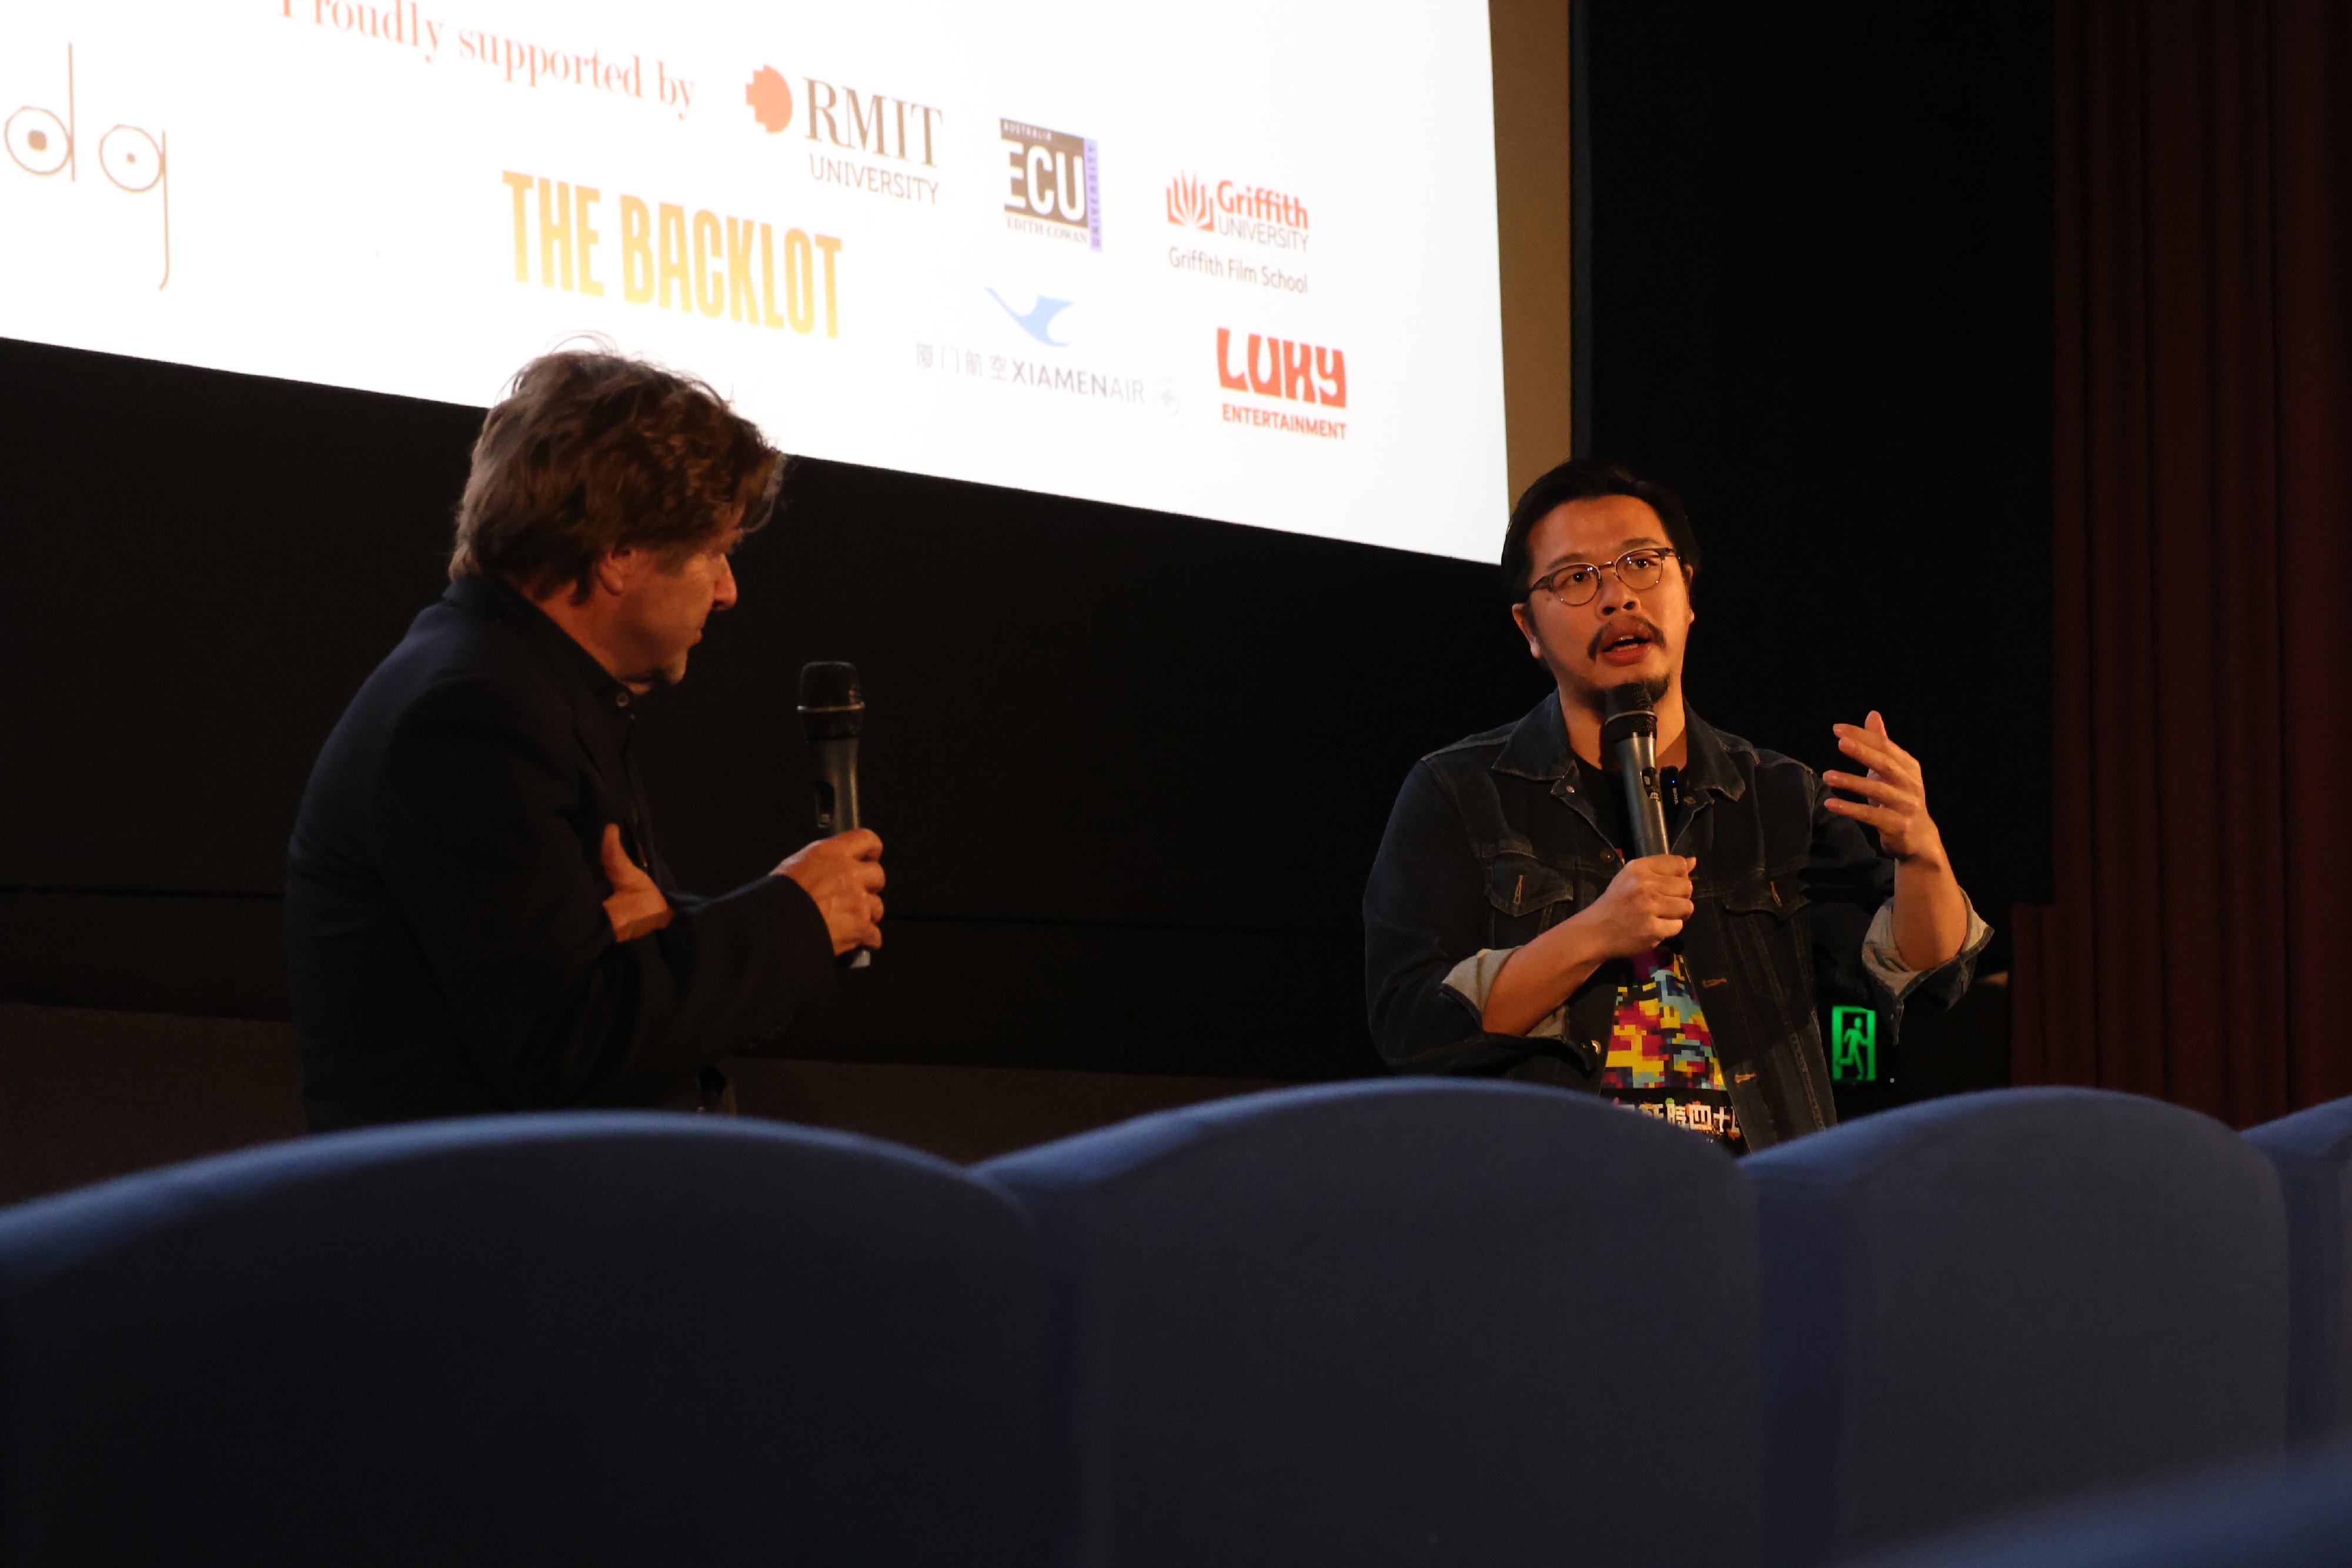 The Hong Kong Economic and Trade Office, Sydney is supporting the 2023 Golden Koala Chinese Film Festival Hong Kong Screening Week to promote the film industry in Hong Kong. Photo shows Director Ho Cheuk-tin (right) at a question and answer session after the screening of "Over My Dead Body" in Sydney yesterday (November 1).